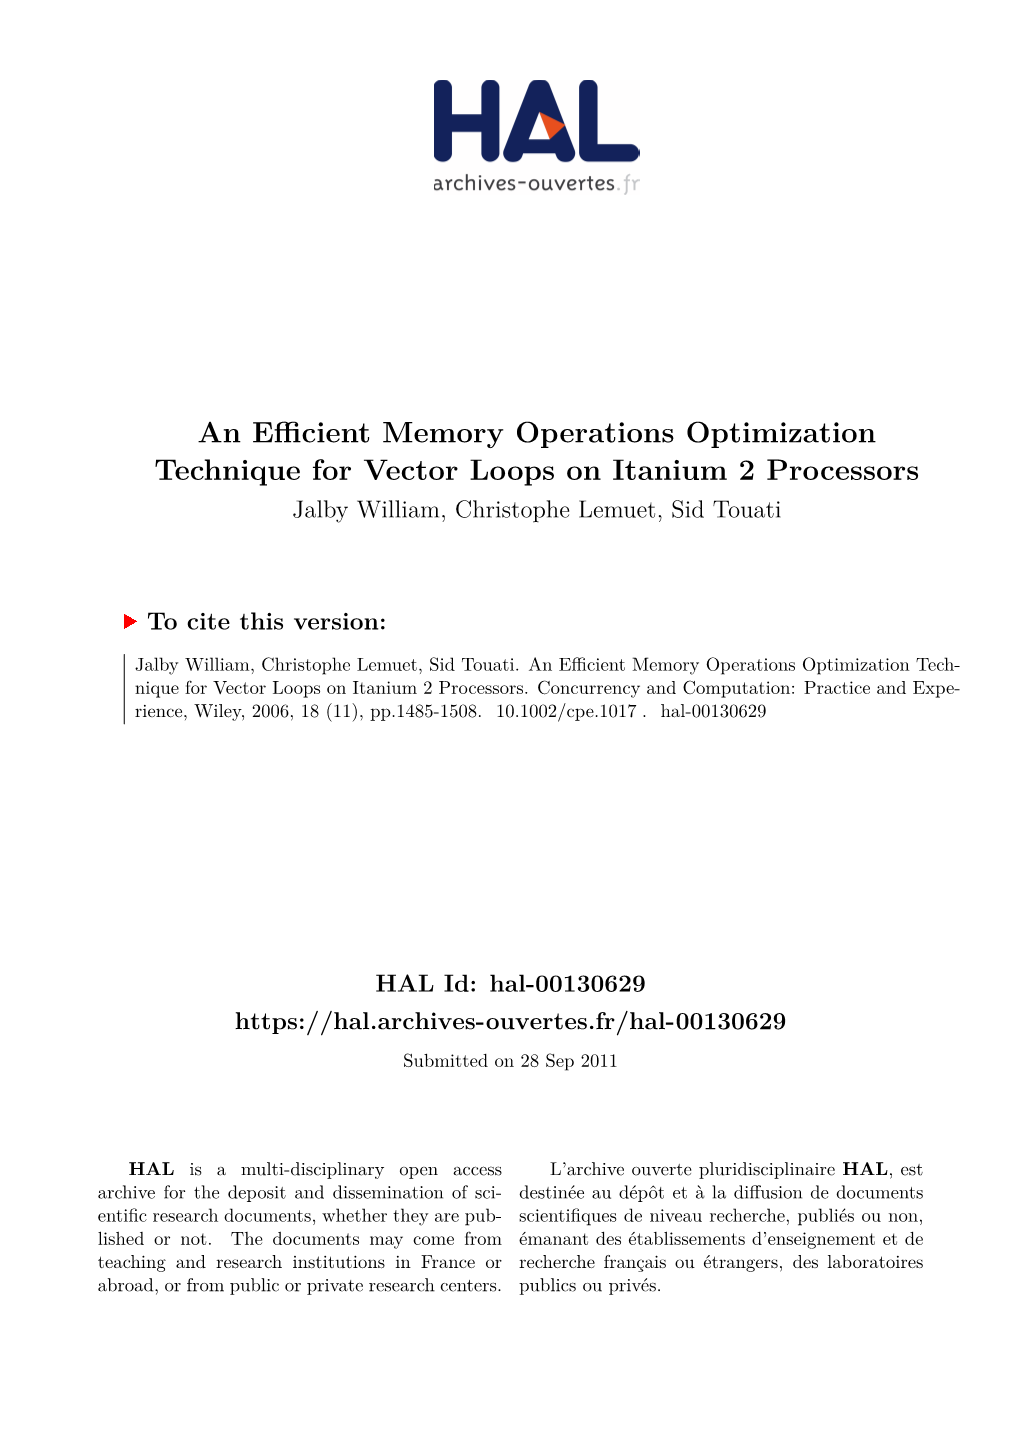 An Efficient Memory Operations Optimization Technique for Vector Loops on Itanium 2 Processors